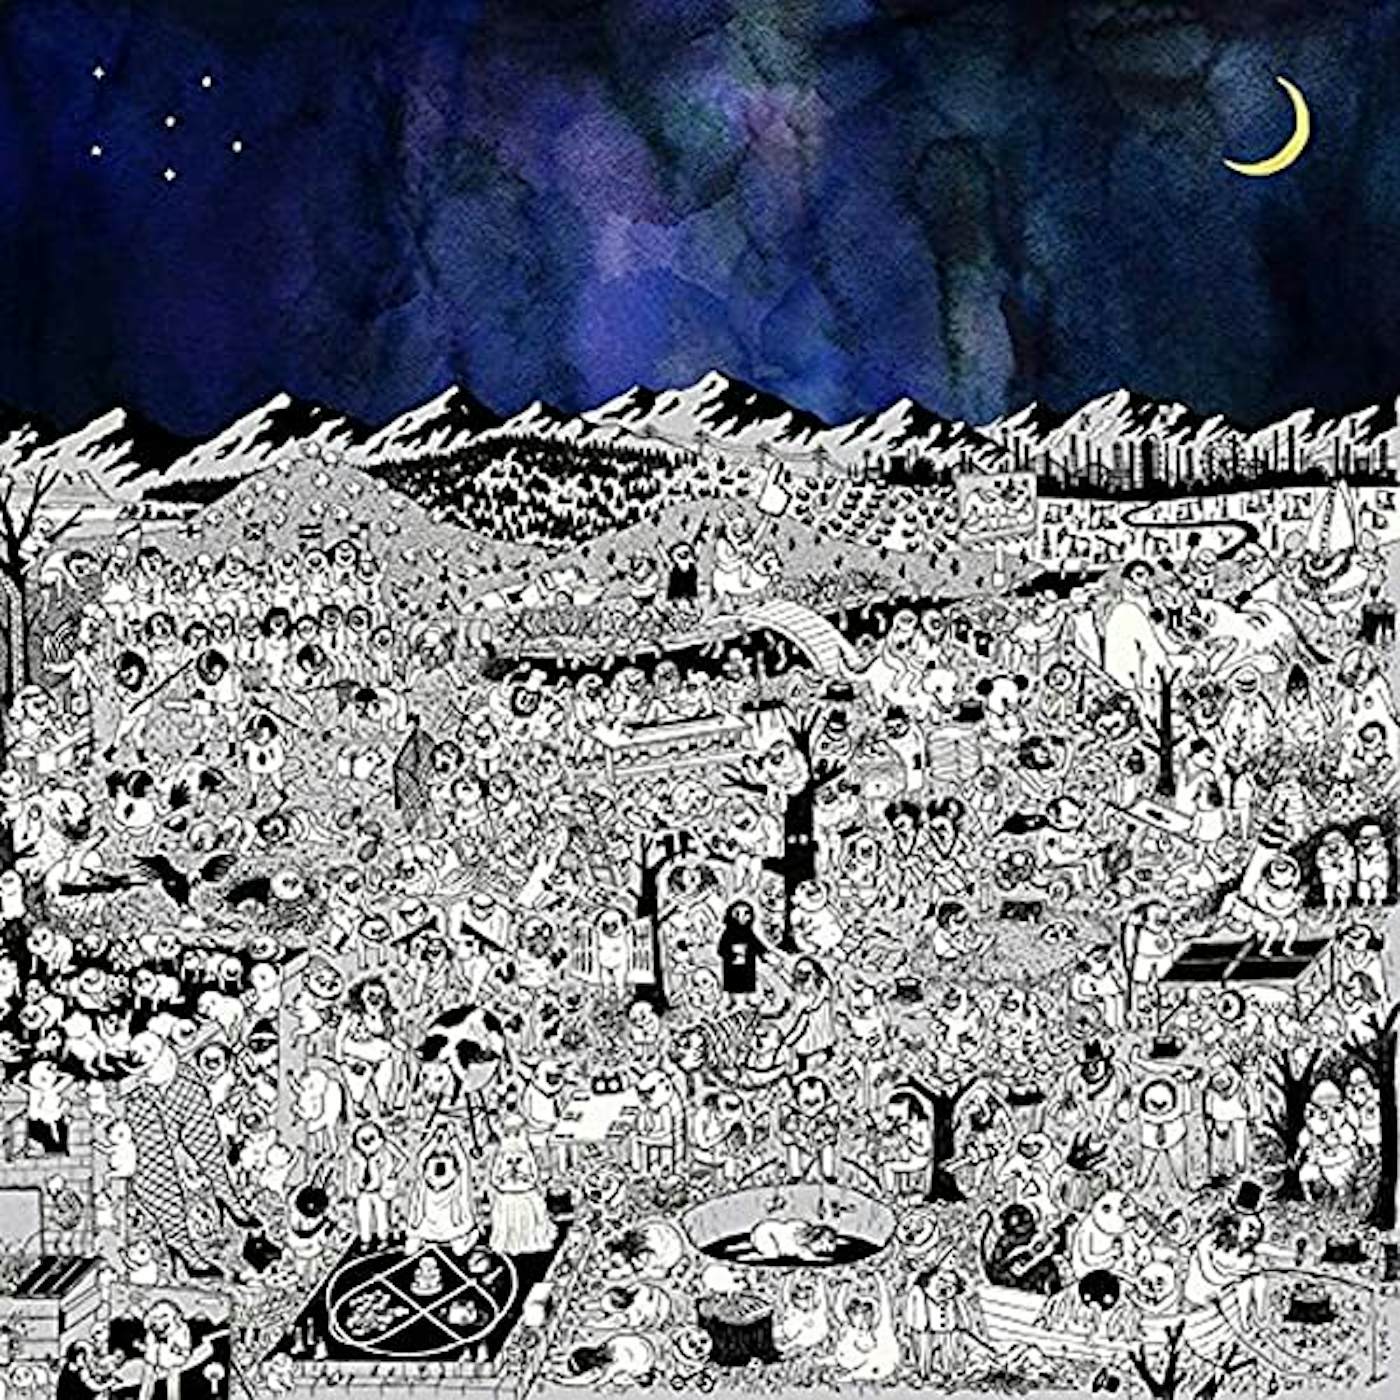 Father John Misty PURE COMEDY (DL CARD) Vinyl Record